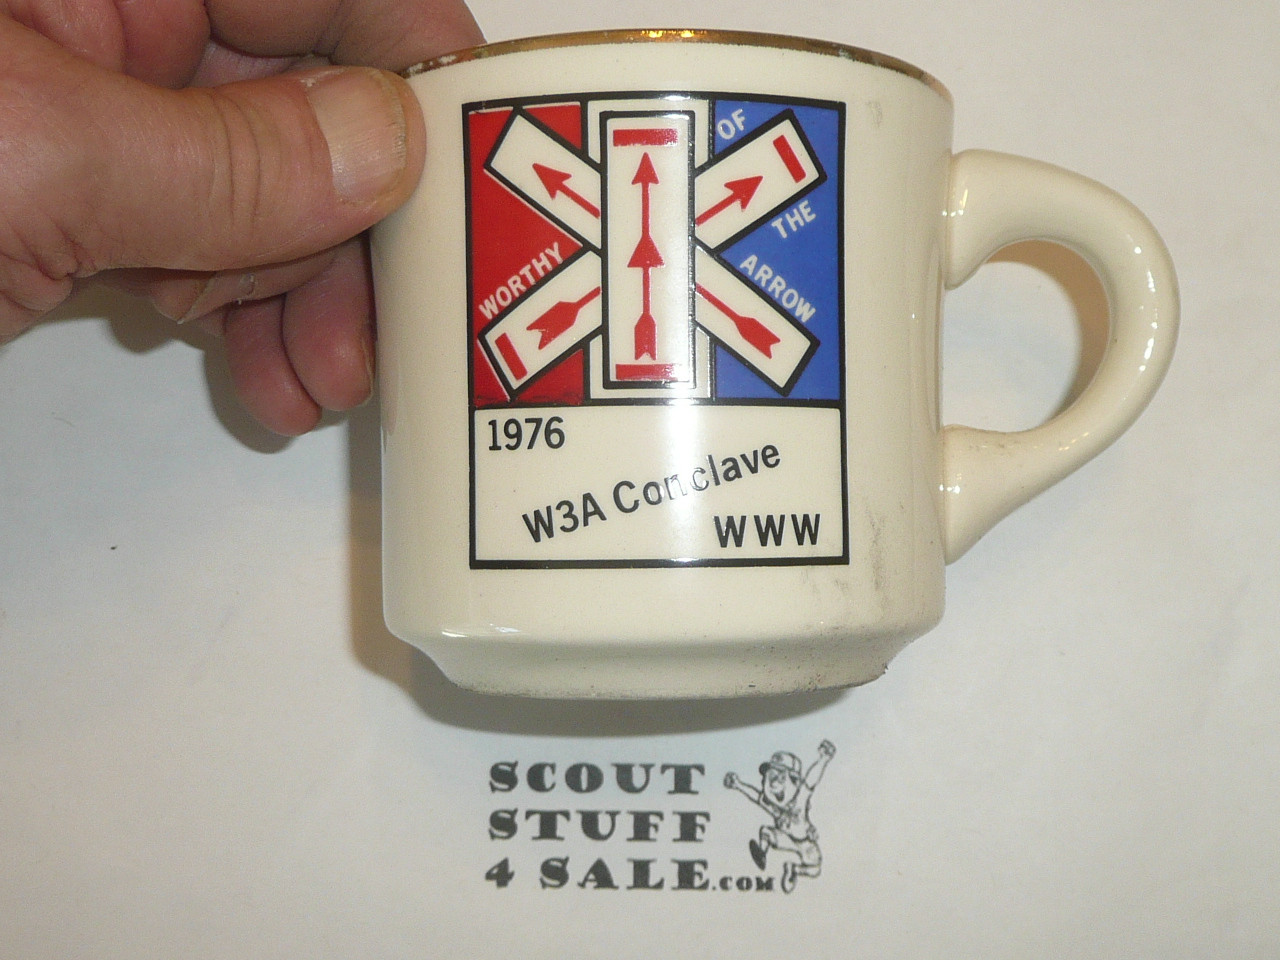 1976 Order of the Arrow Section W3A Conference Mug